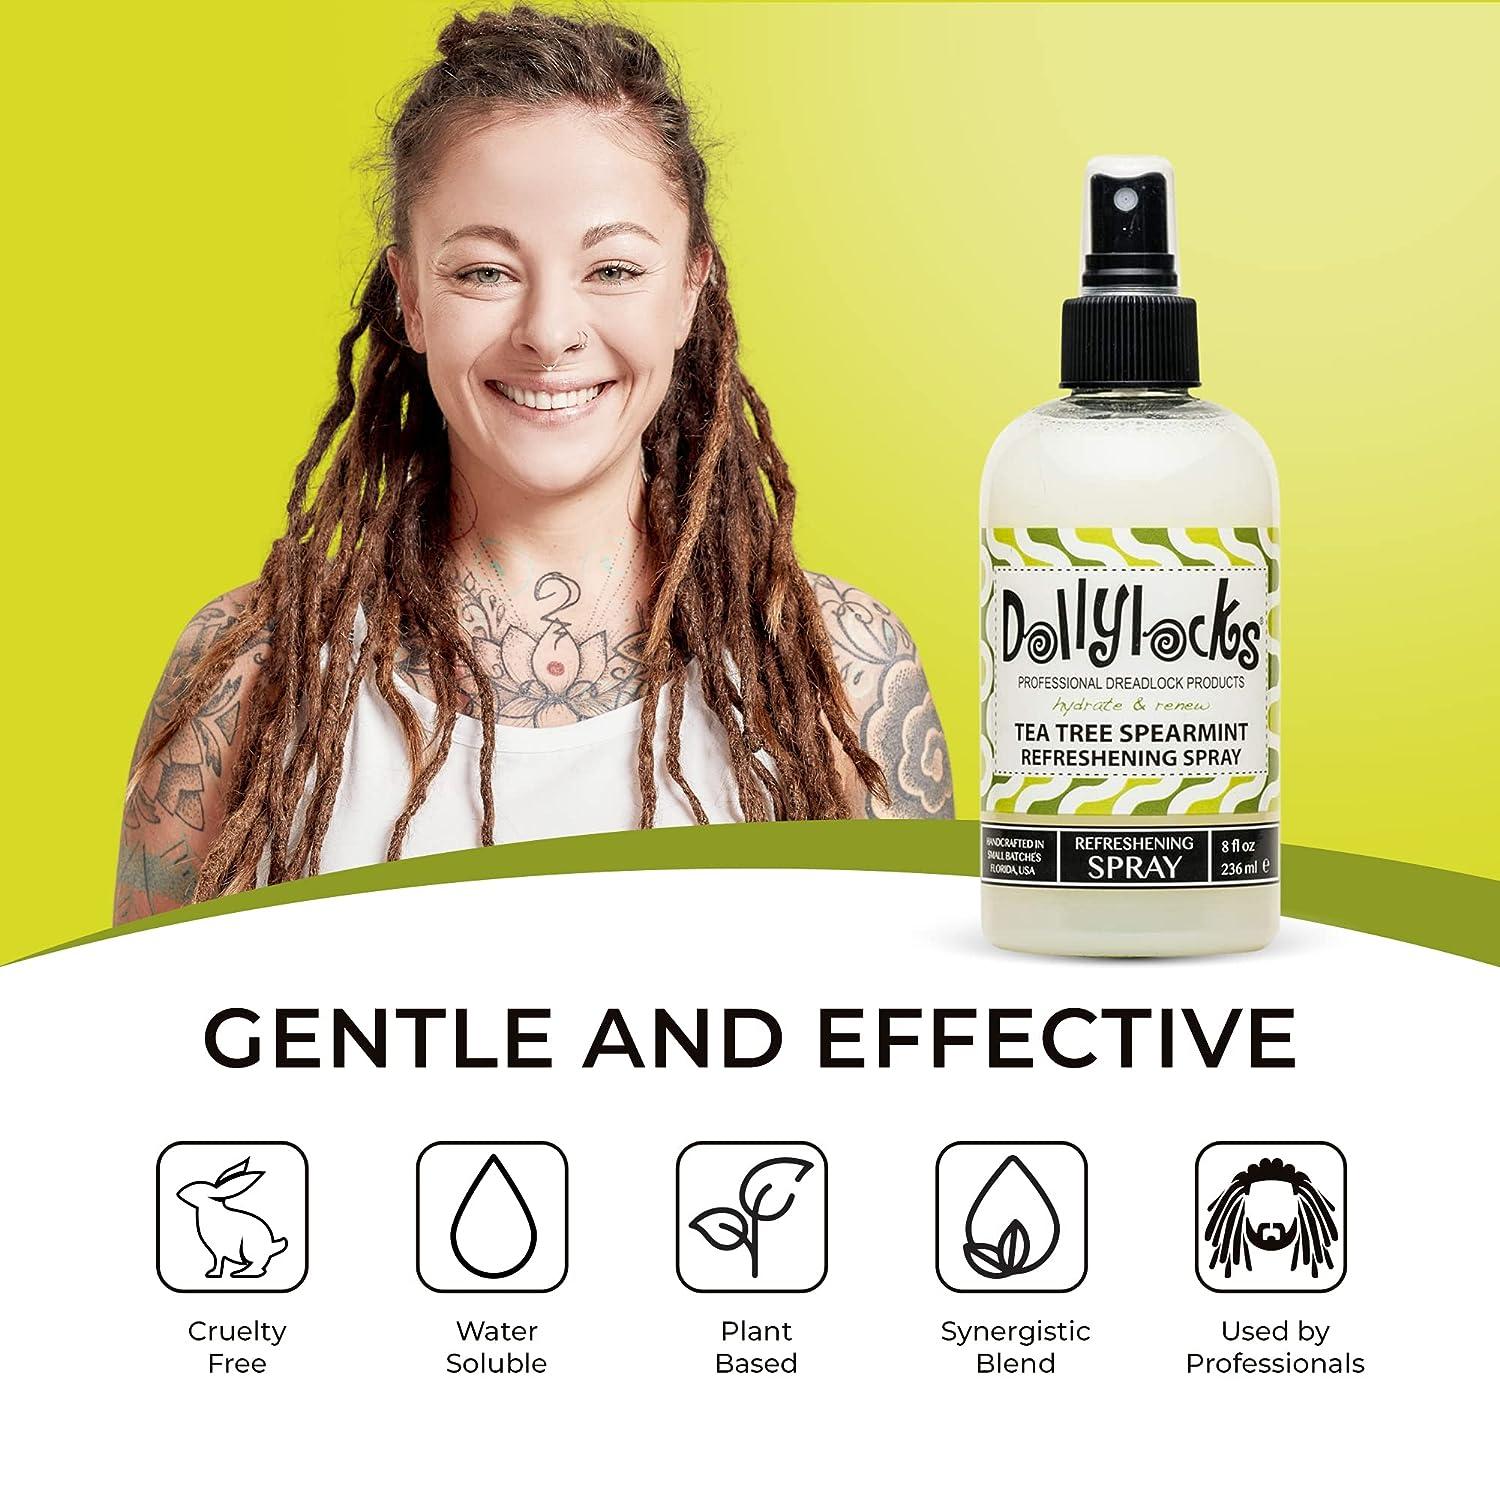 Professional Organic Dreadlock Refreshening Spray - Plant Based Loc Hair  Care Products Residue-free and Sulfate-free Loc and Scalp Refreshing Spray  for Dreadlocks Tea Tree Spearmint 8oz